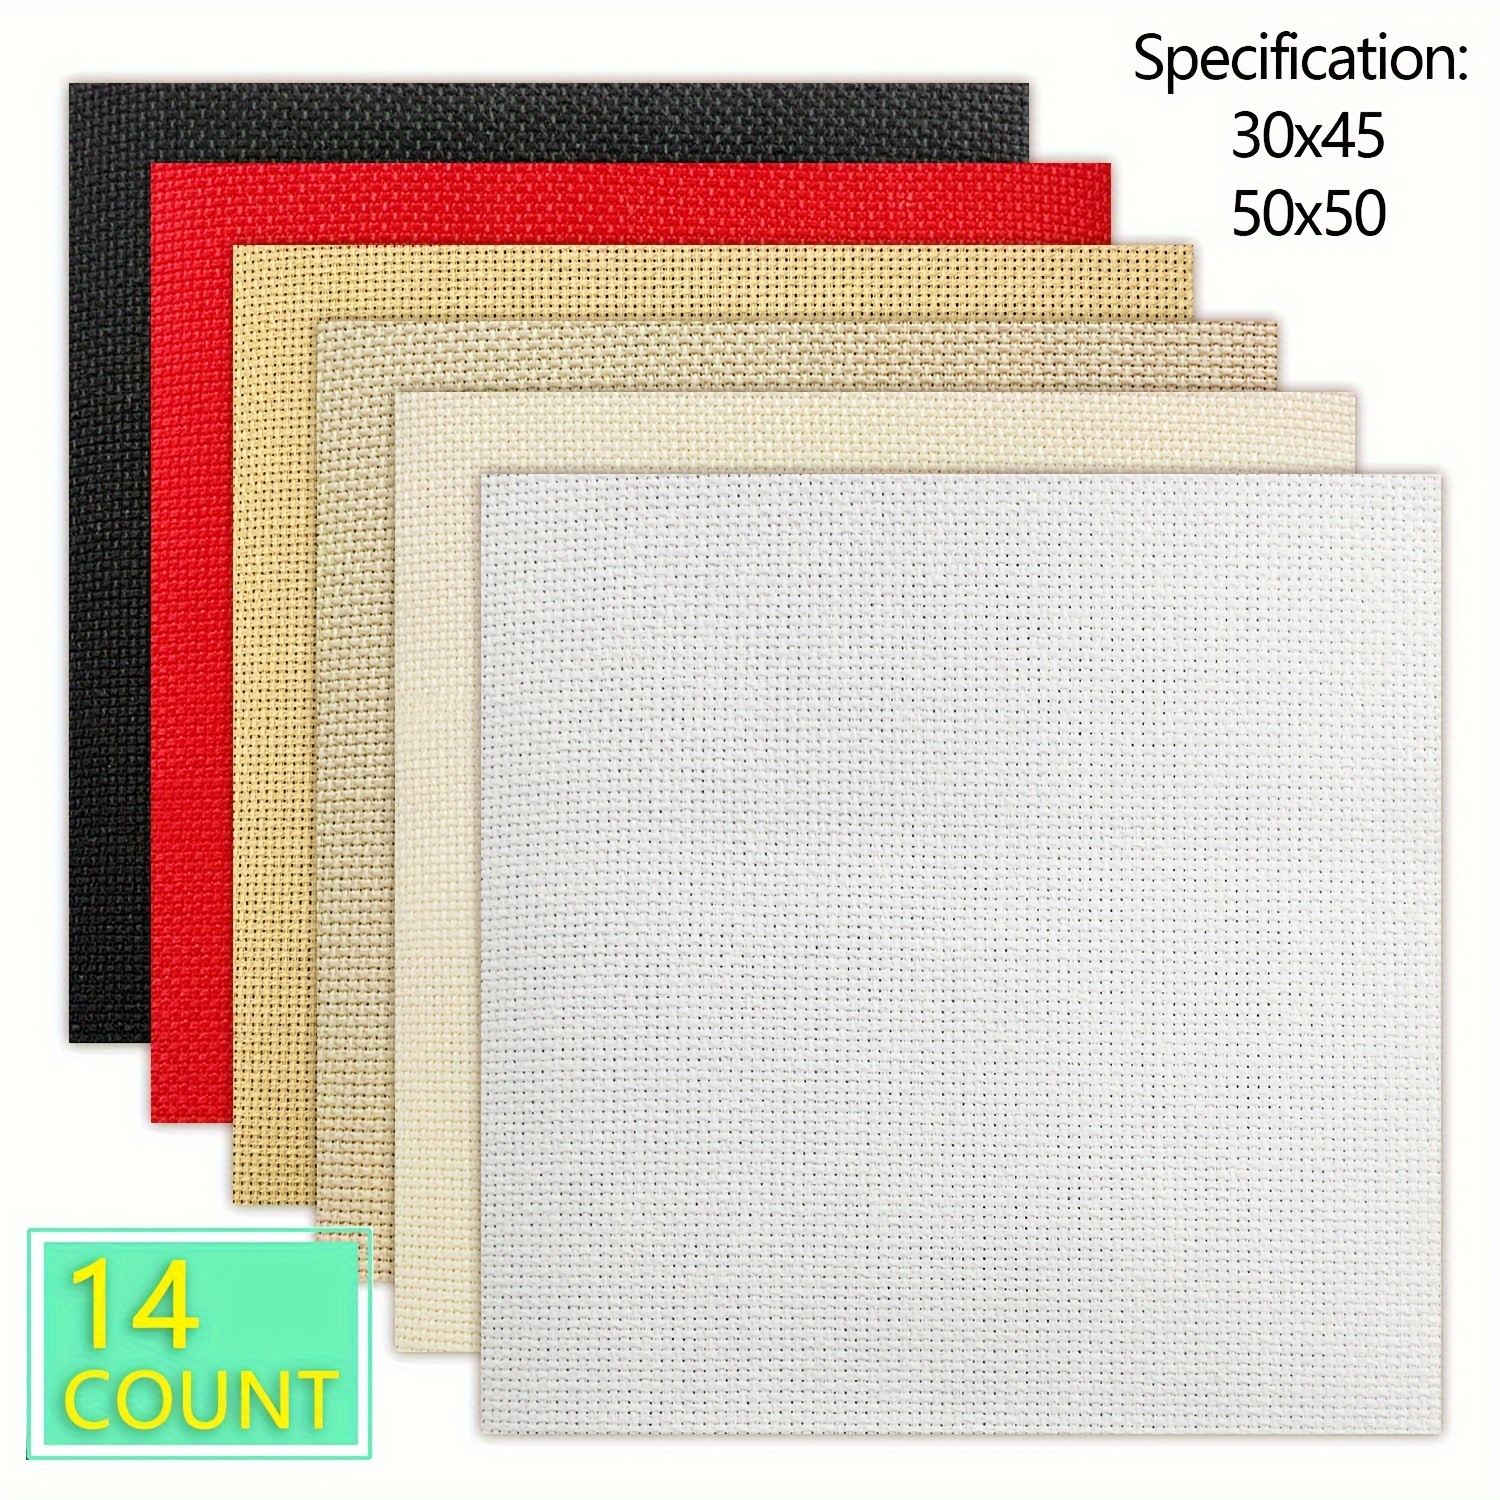 

Premium 14ct Cotton Cross Stitch Fabric, Pre-cut Embroidery Cloth For Diy Needlework, Available In Multiple Colors - Khaki, Light Brown, White, Cream, Red, Black